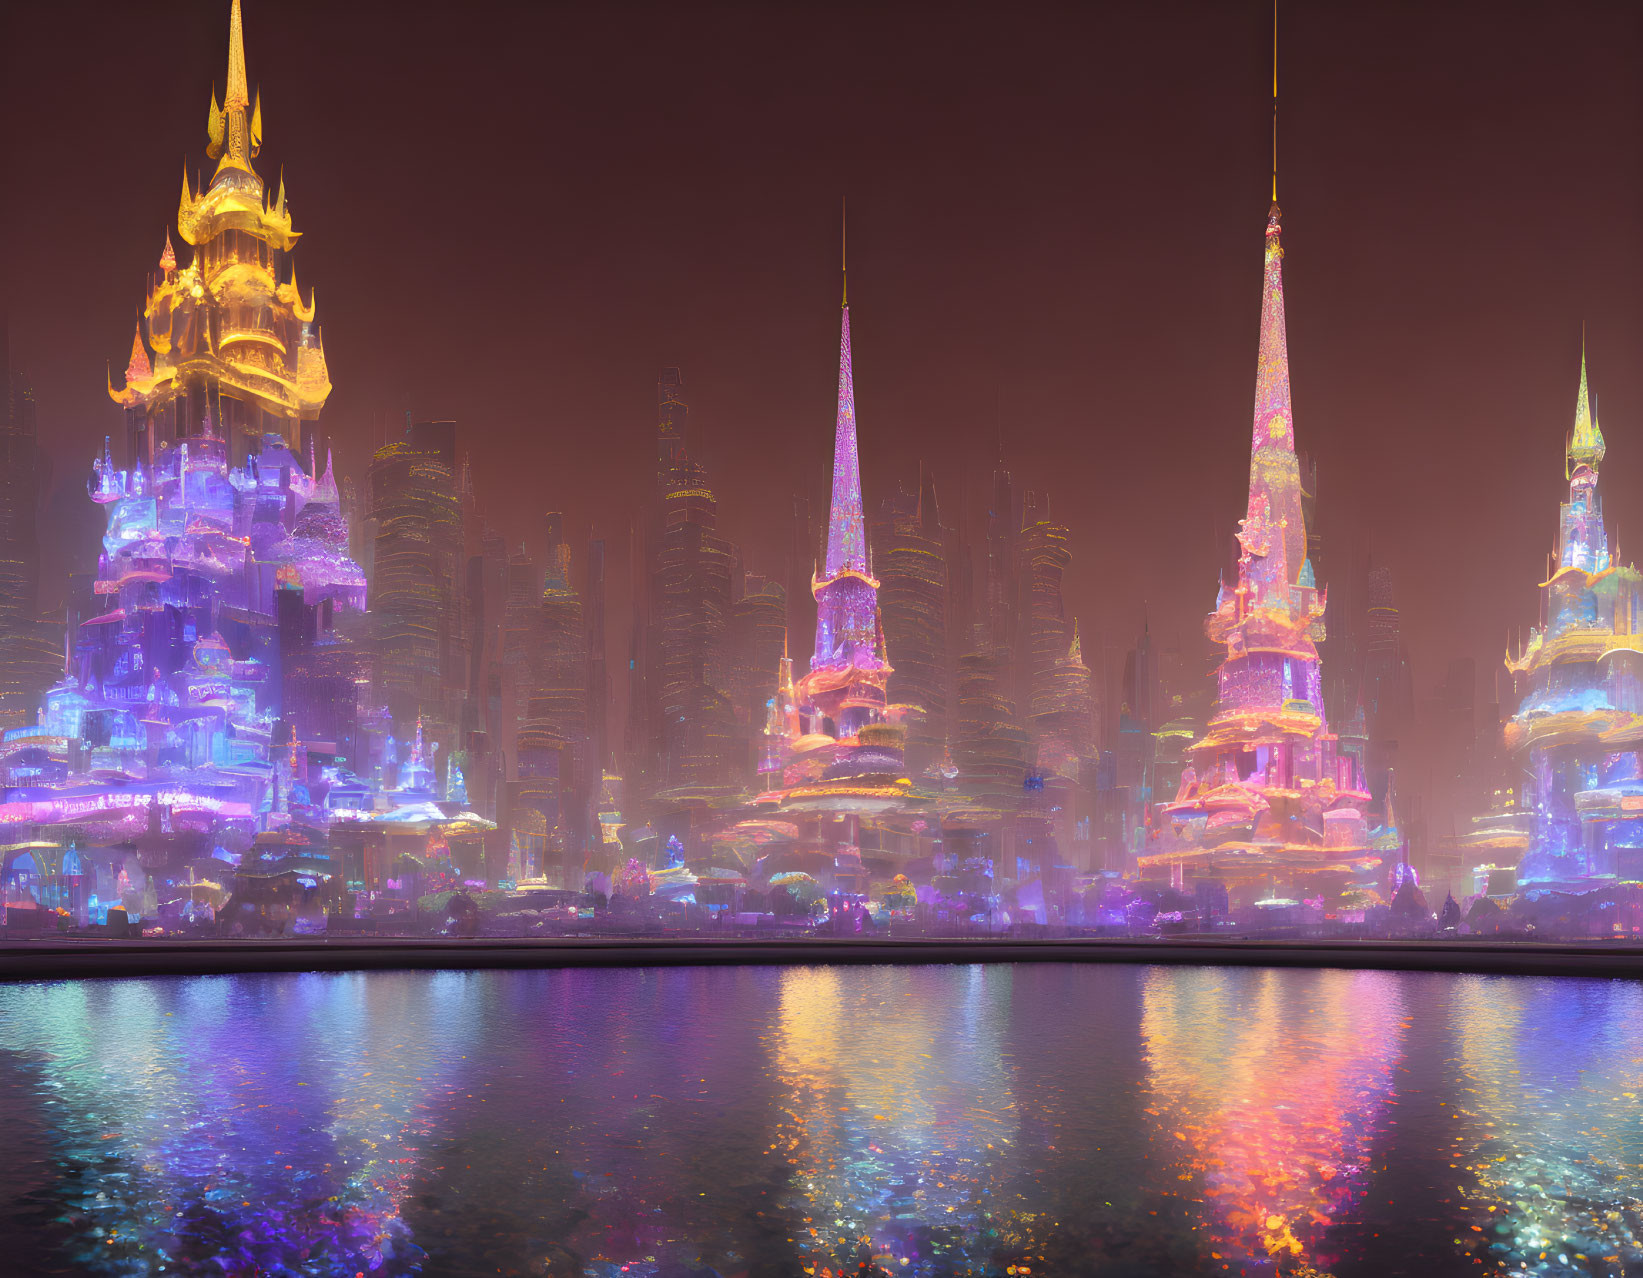 Neon-lit futuristic cityscape by tranquil water